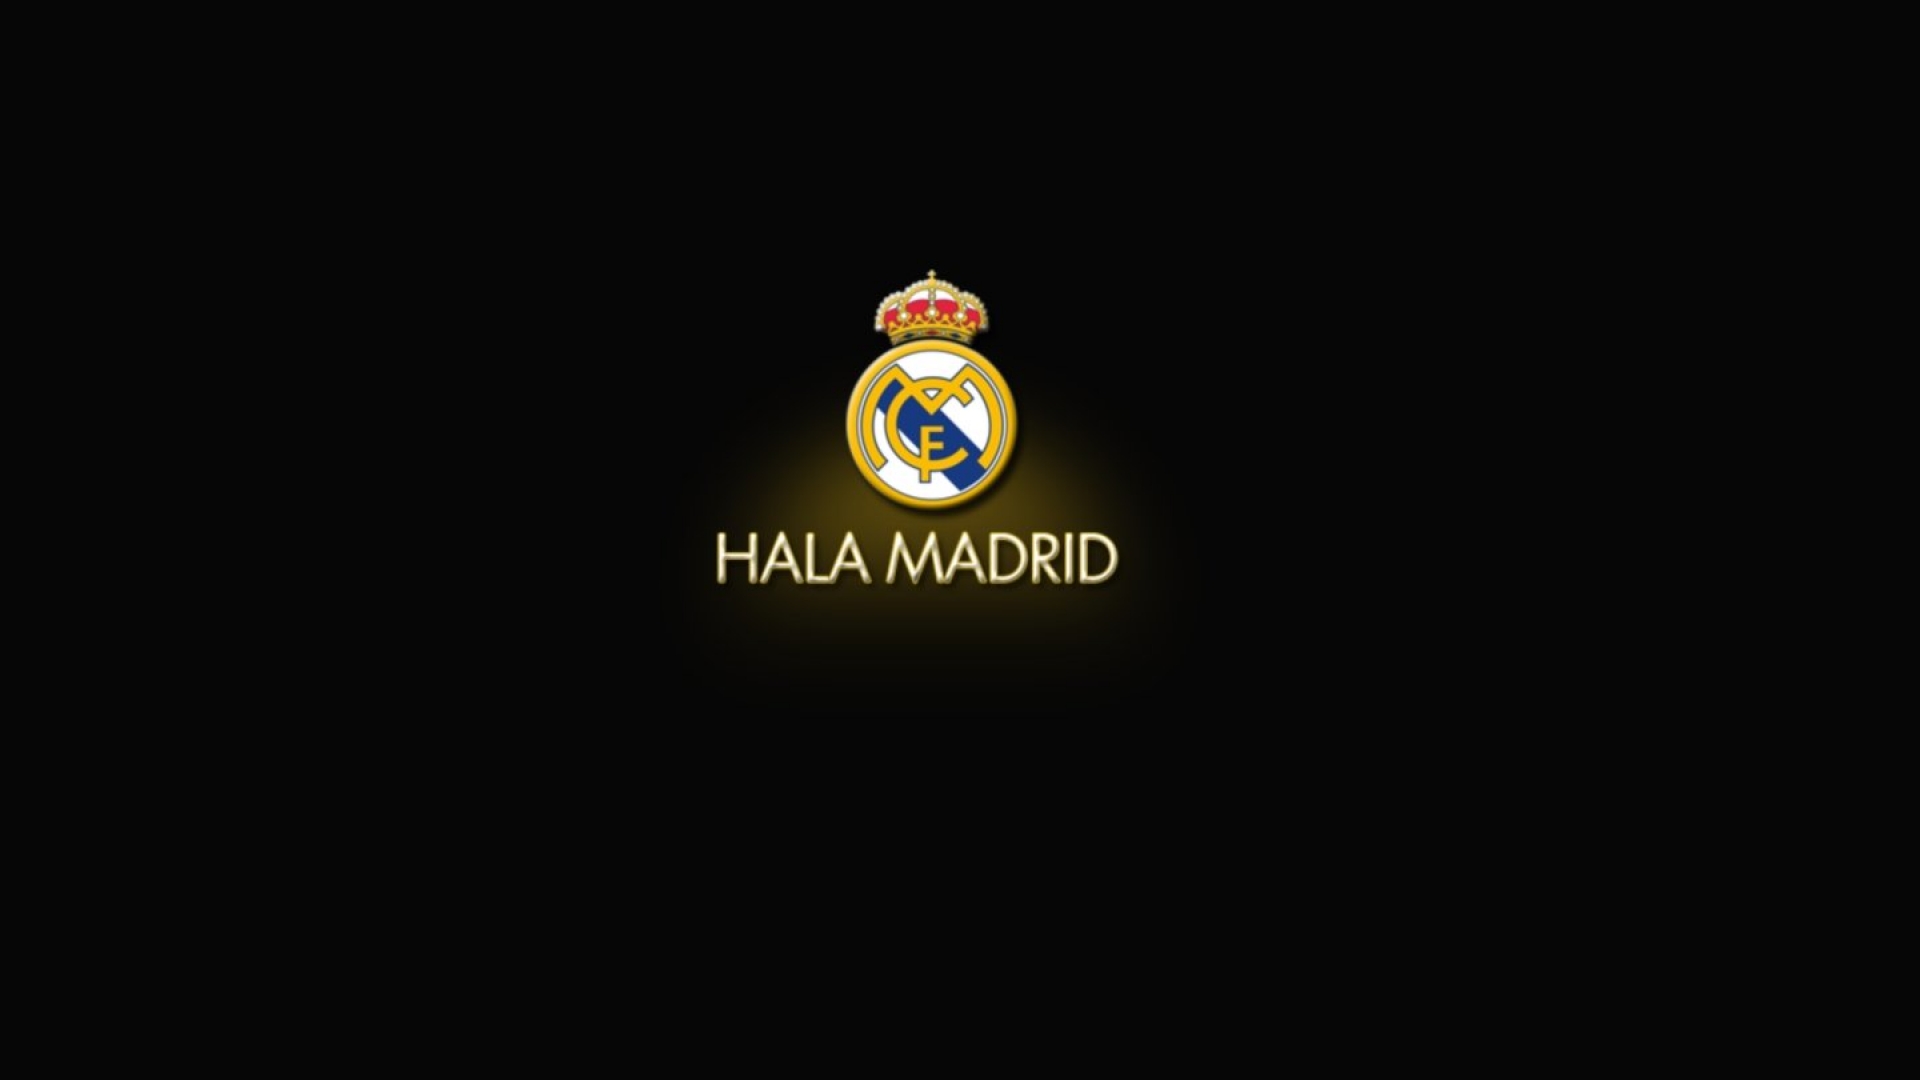 Real Logo Madrid Black Wallpaper Is High Definition You